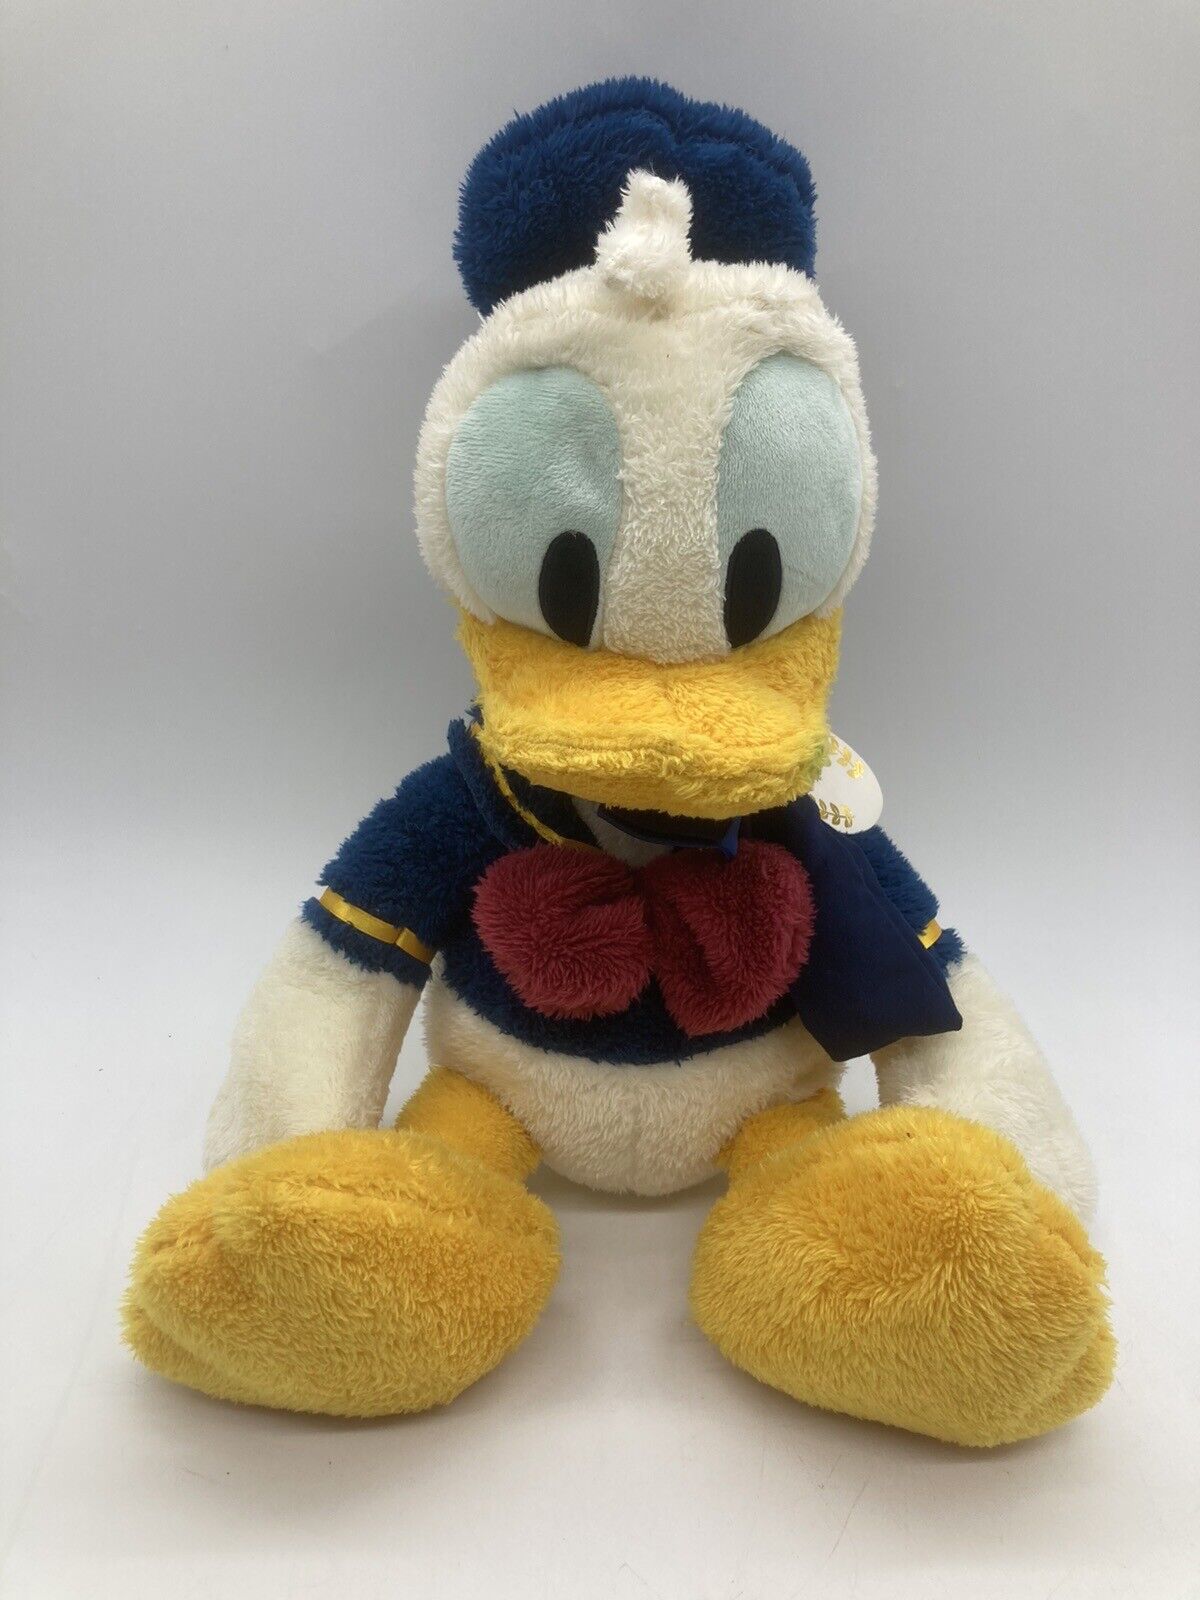 Donald Duck Plush Toy Preciality Special Plush Donald BIG Large Approx. 18”